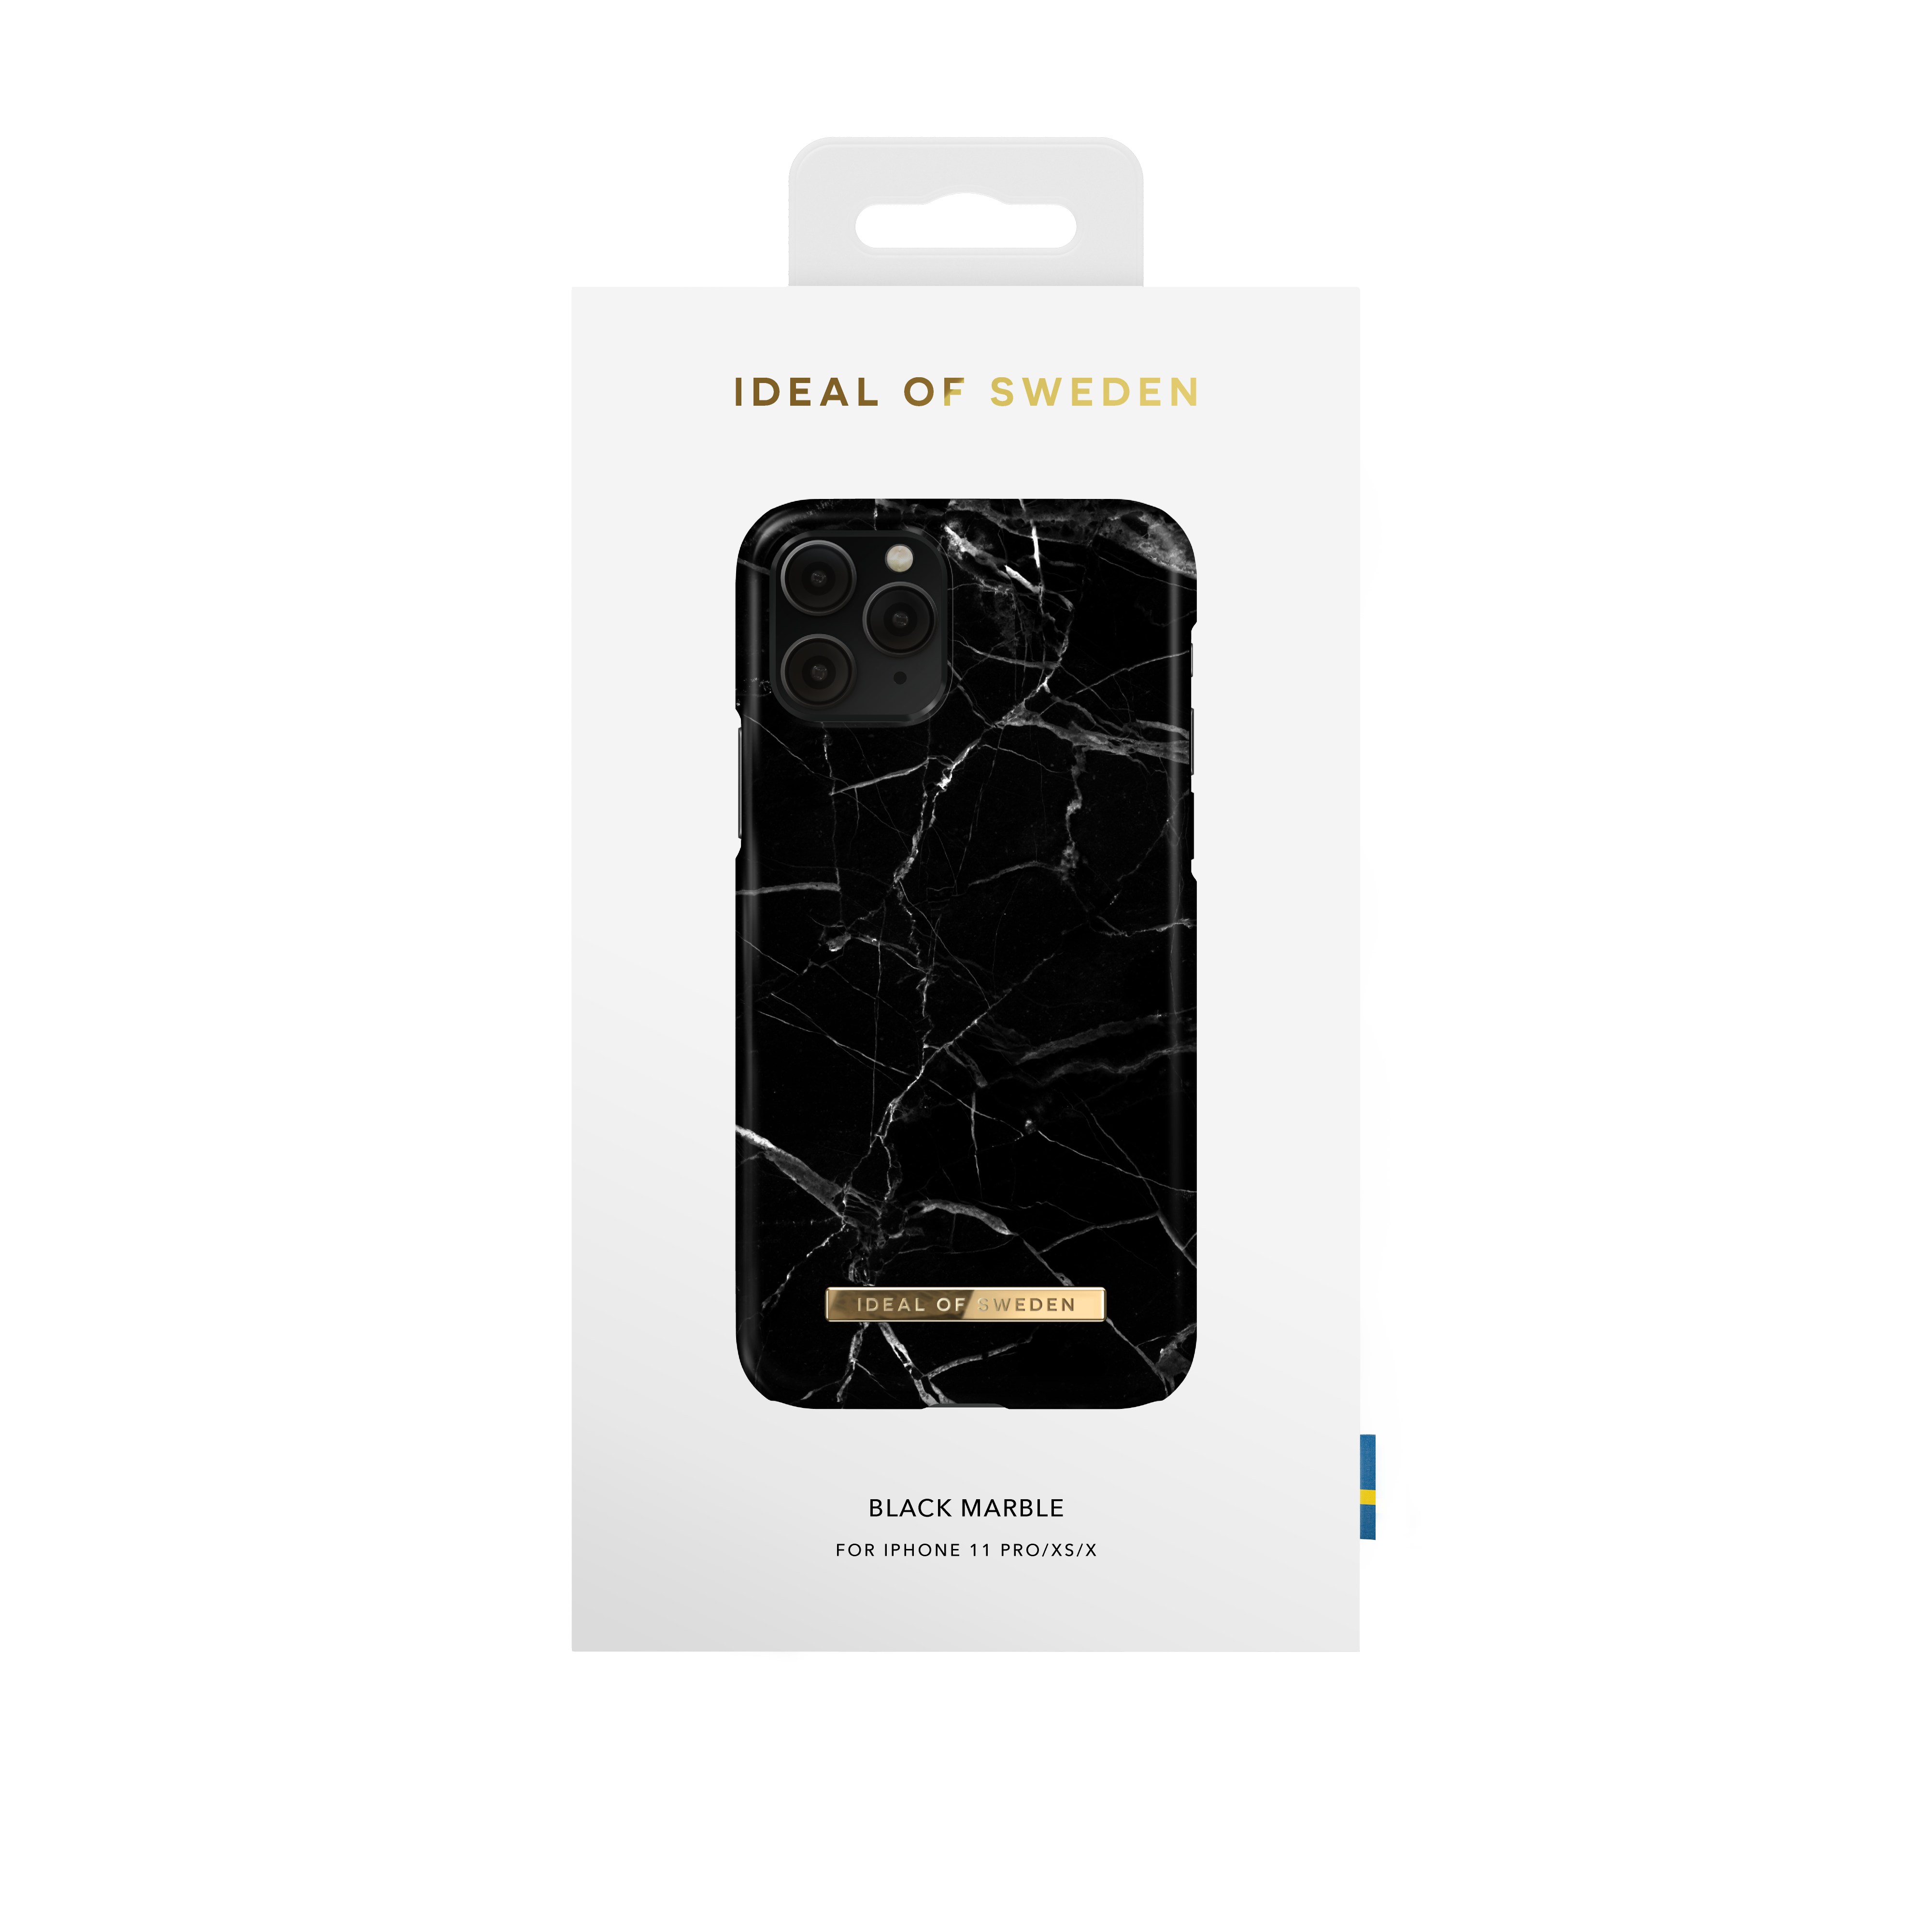 Apple, Black iPhone iPhone X, 11 XS, Pro, iPhone Backcover, SWEDEN Marble OF IDEAL IDFC-I1958-21,